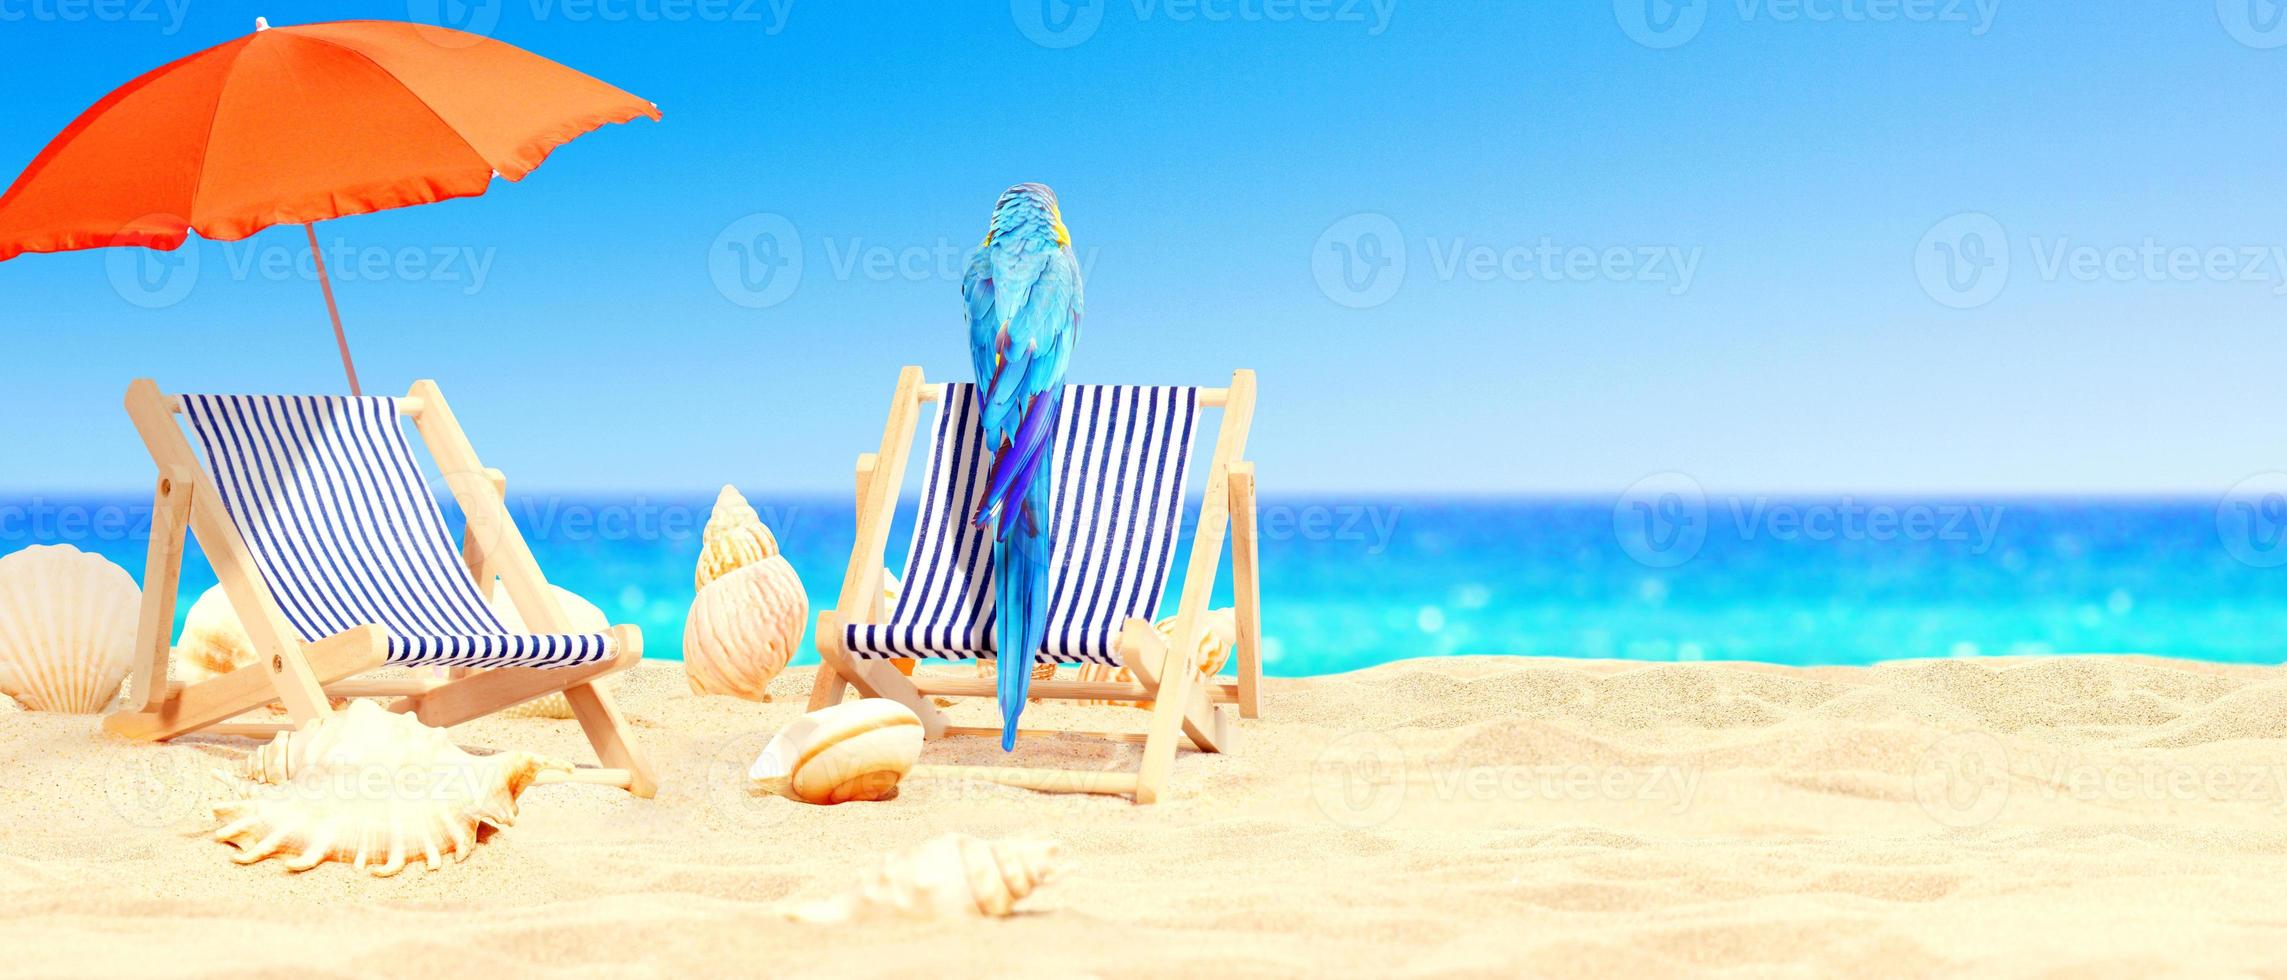 Parrot on tropical beach in the sun on deck chairs under umbrella. photo